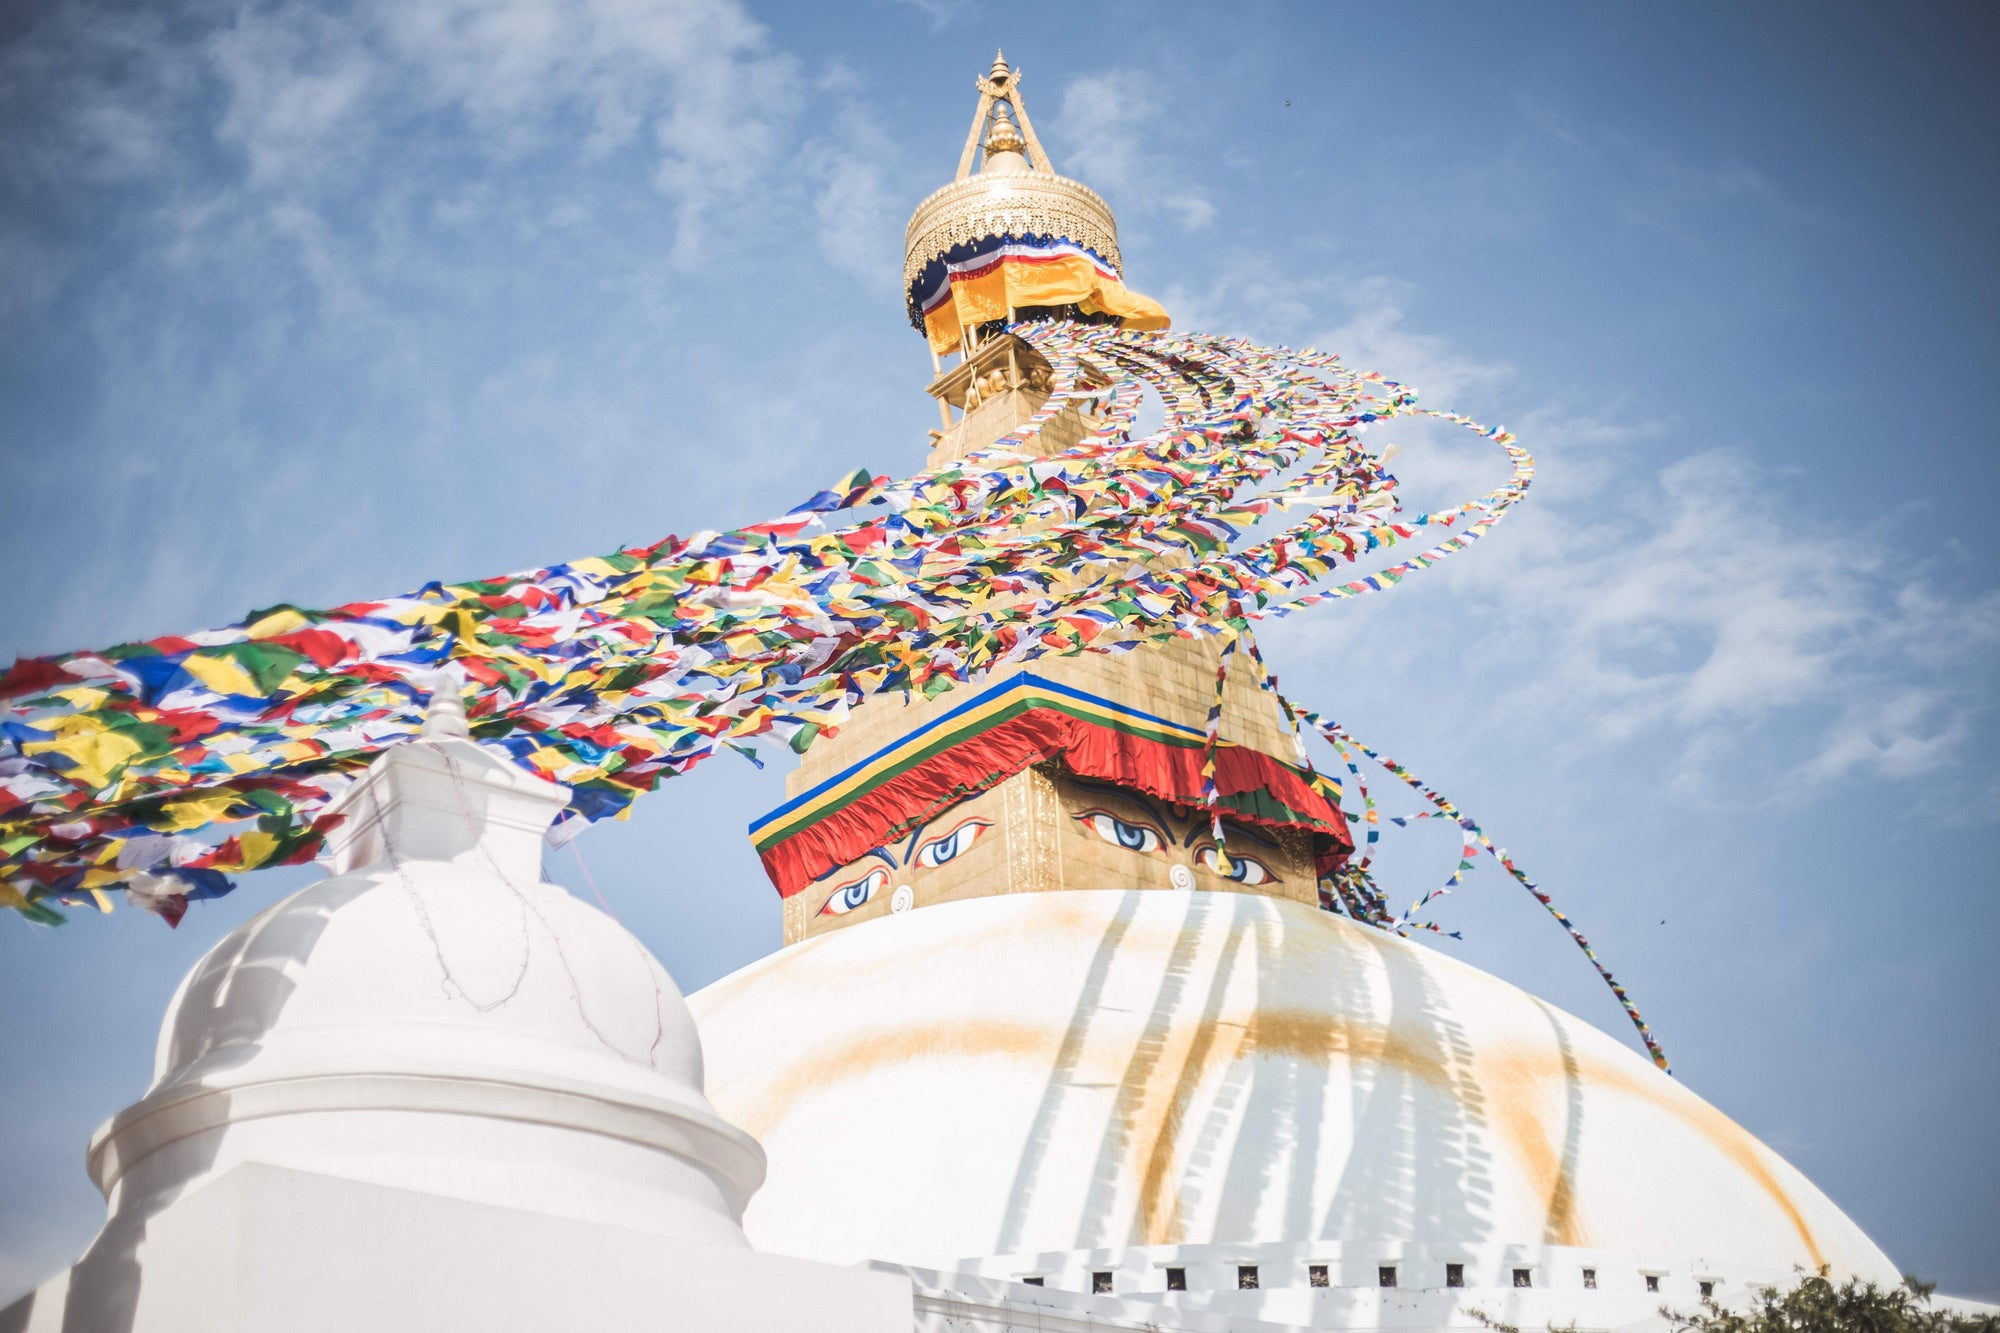 8 Things You Should Know About Tibetan Prayer Flags Before Hanging Them Up